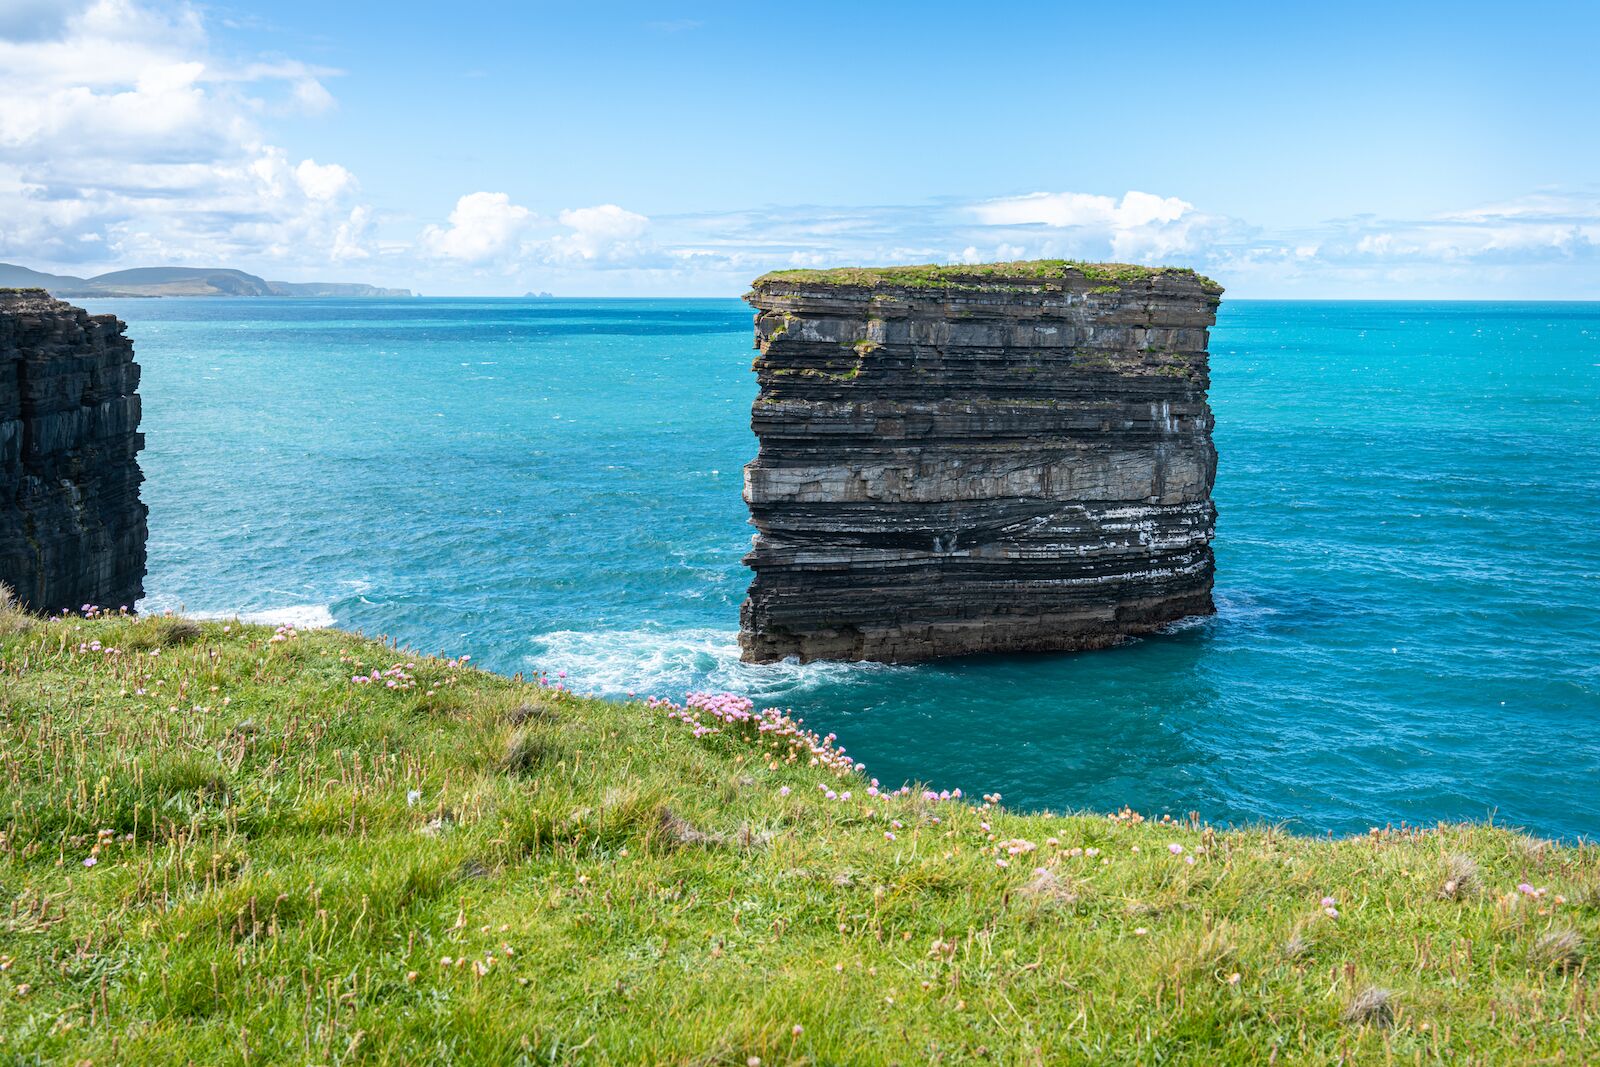 Scenery of the coast in County Mayo, Ireland, where the accent, the Mayo accent, is very distinctive